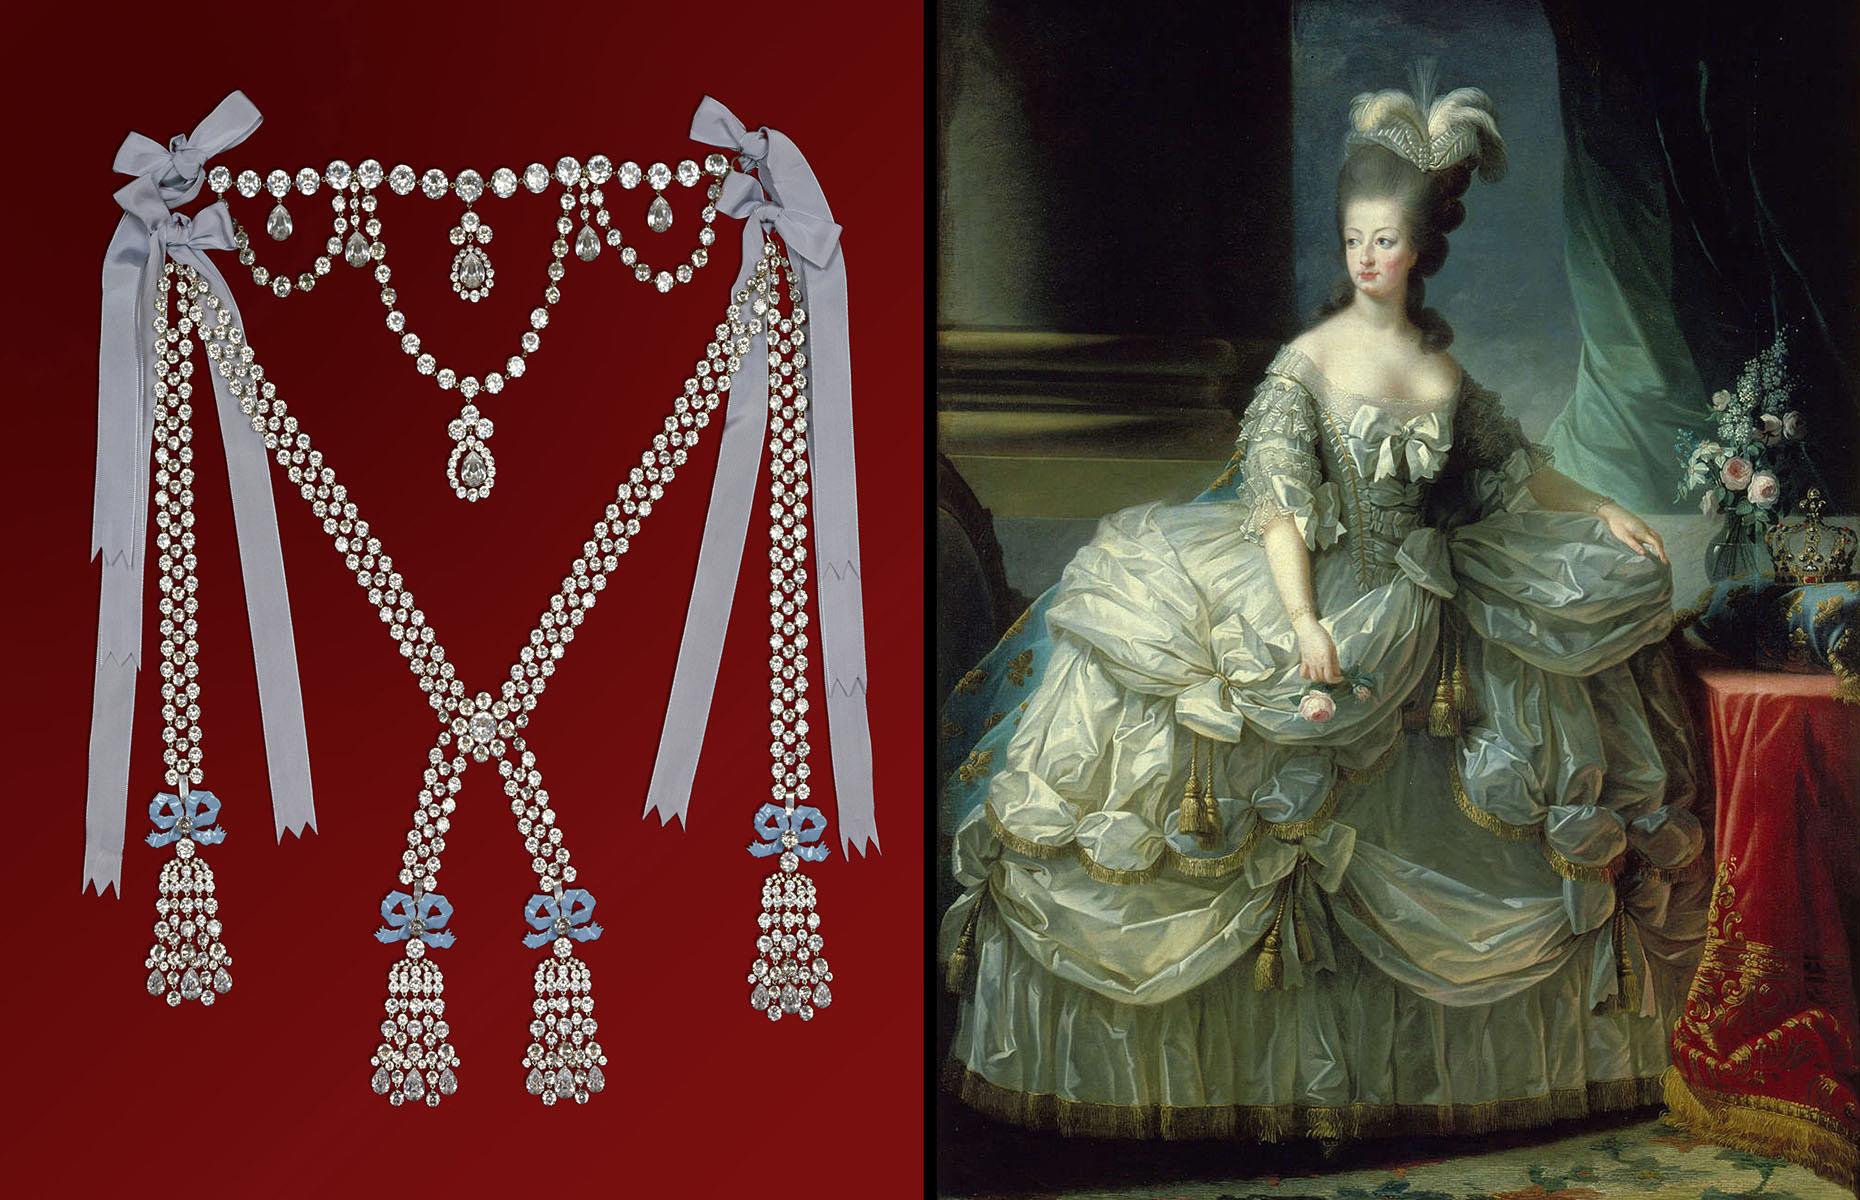 <p>Before Marie Antoinette ascended to the throne, King Louis XV of France commissioned Parisian jewelers Charles Auguste Boehmer and Paul Bassange to craft an extravagant diamond necklace that would surpass all others in magnificence.</p>  <p>This astonishing gift, intended for the king's mistress, Madame du Barry, is alleged to have featured 647 diamonds and carried an astounding price tag of 2,000,000 livres, around $37 million in today's money.</p>  <p>Following the sudden death of the king in 1774, the necklace remained unpaid for, leaving its creators close to financial ruin. They made multiple attempts to sell the necklace to Marie Antoinette but she declined, reportedly stating: "We have more need of Seventy Fours [a type of ship] than necklaces."</p>